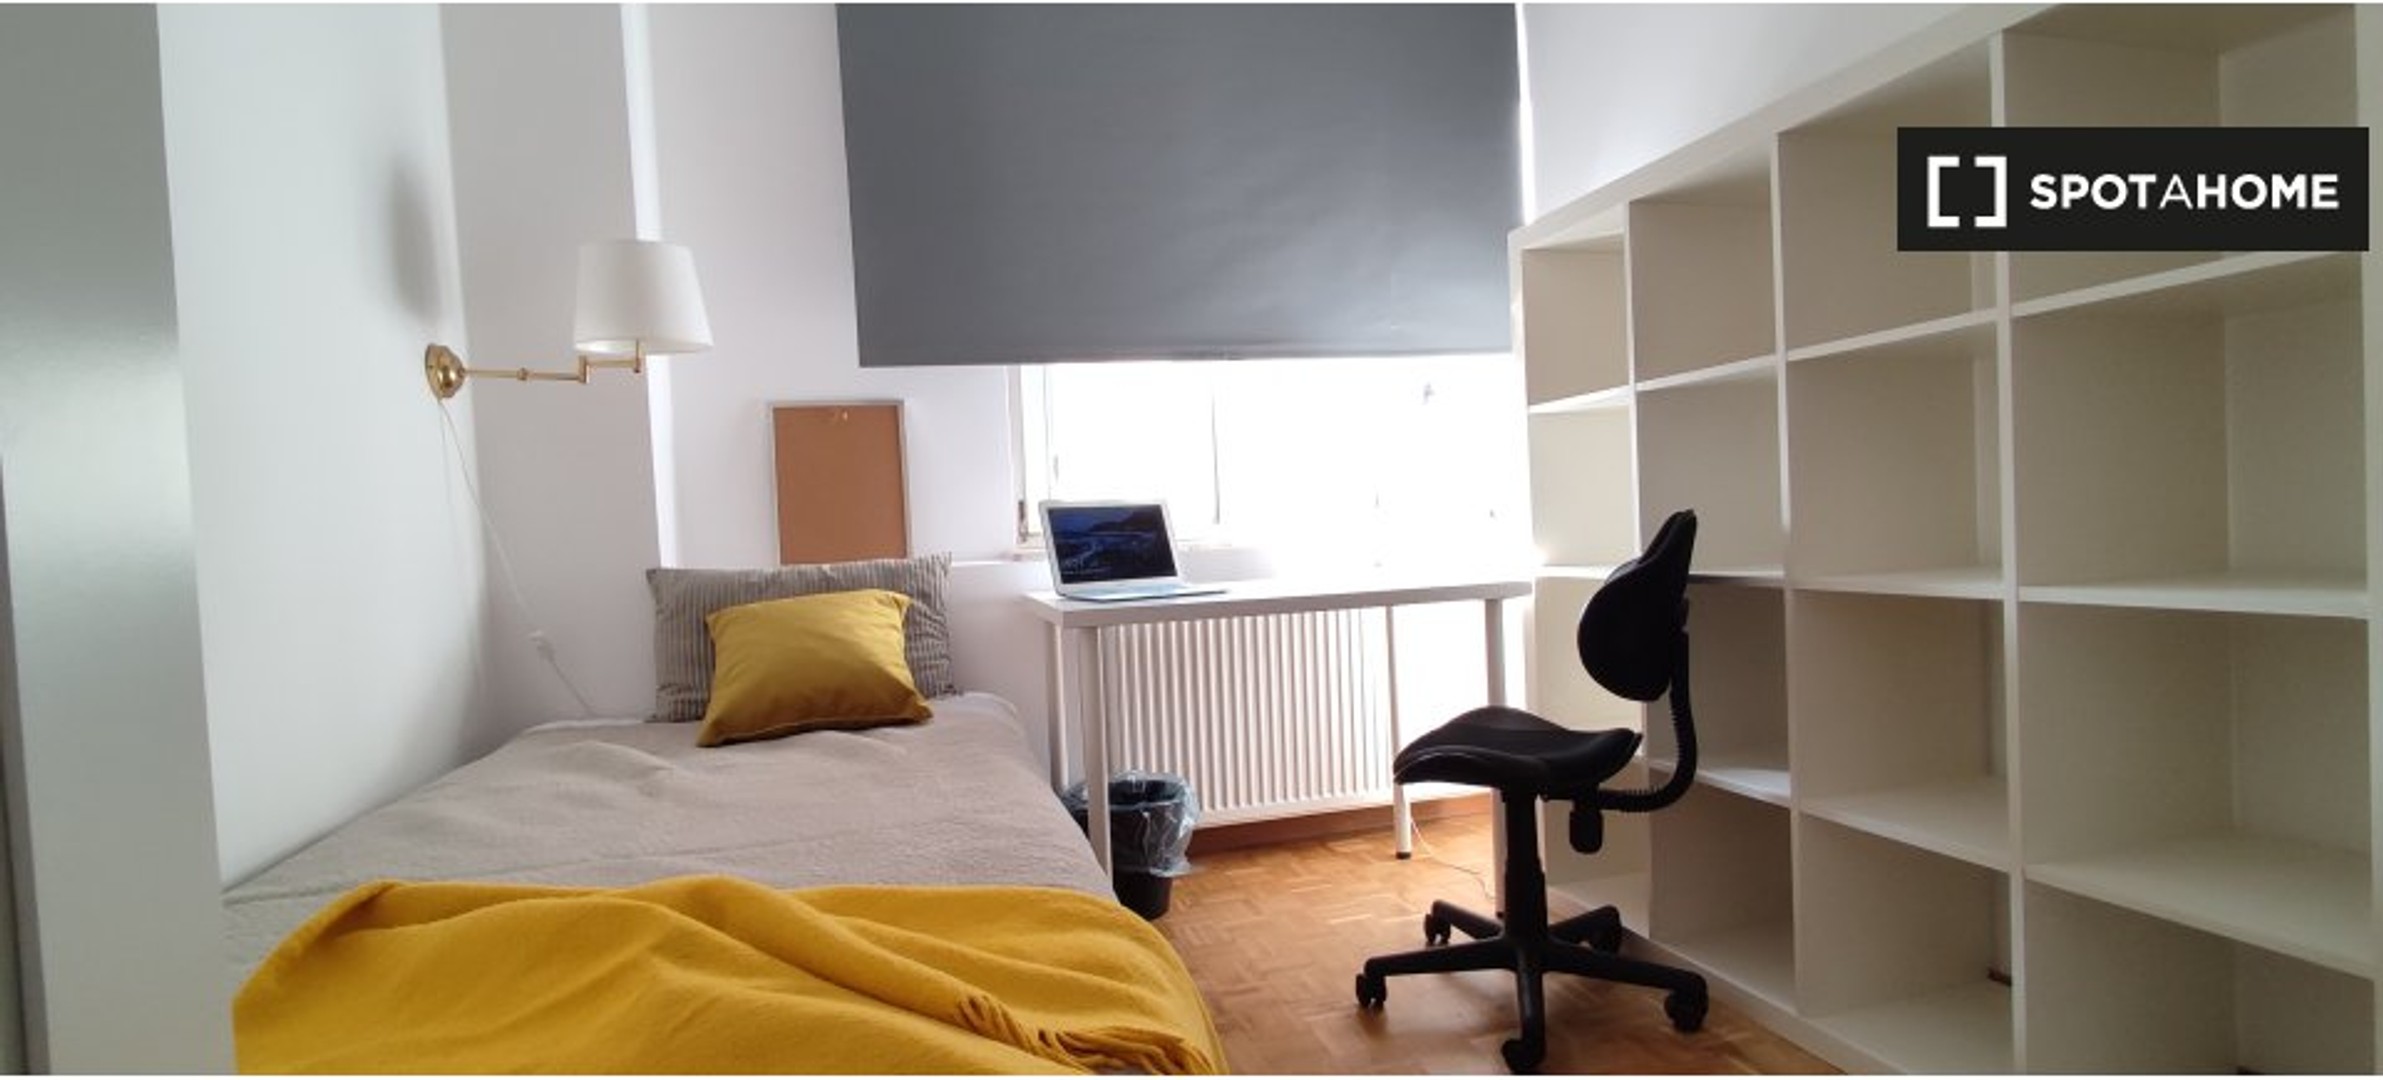 Cheap private room in Warsaw